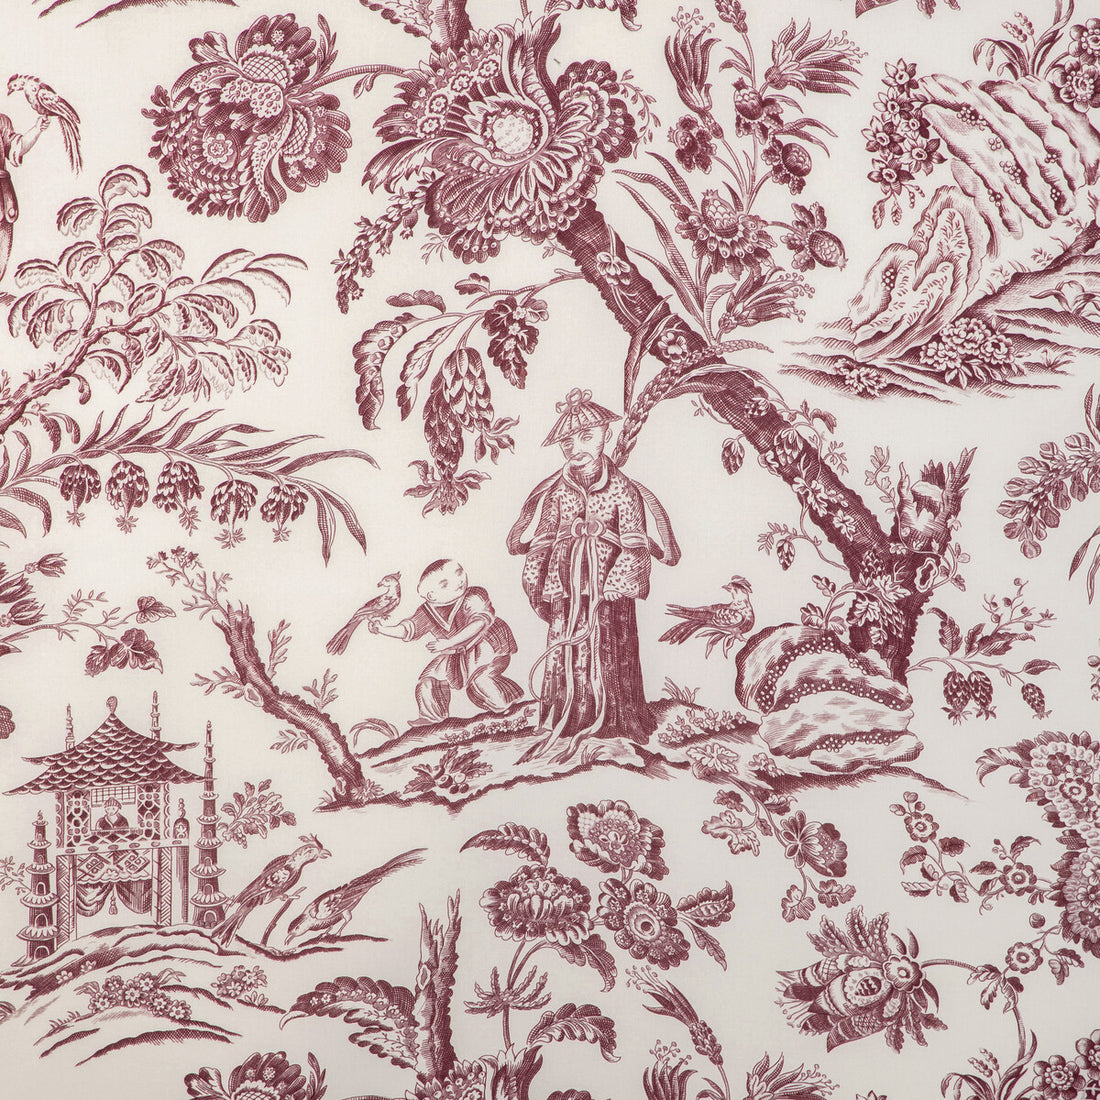 Marcel Print fabric in aubergine color - pattern 8023104.10.0 - by Brunschwig &amp; Fils in the Cadenet collection